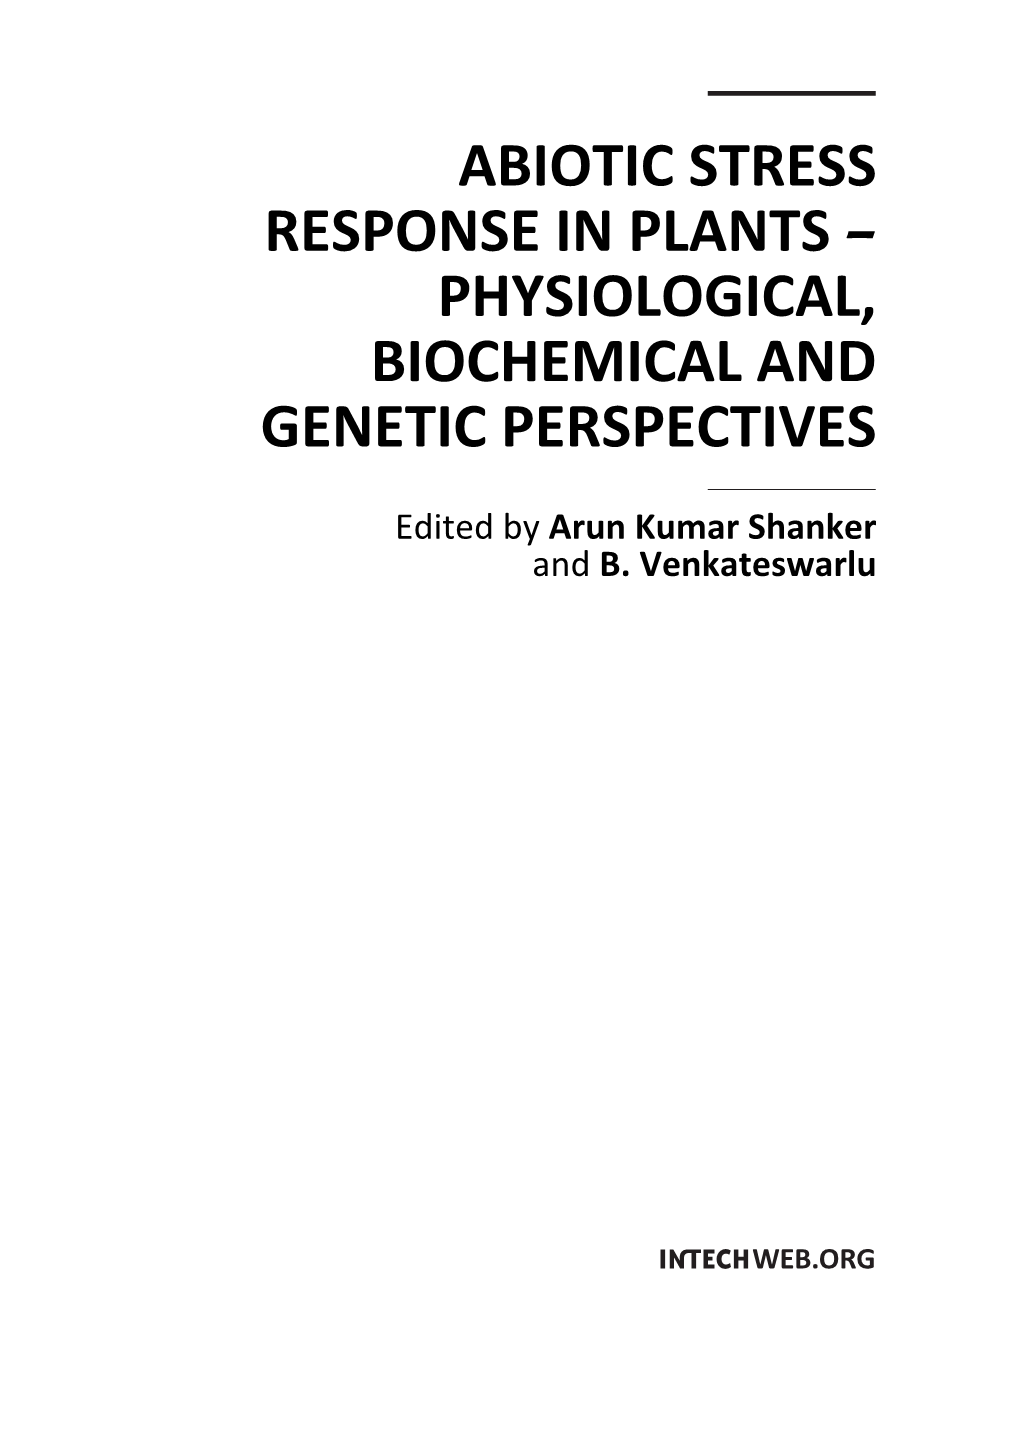 Abiotic Stress Response in Plants – Physiological, Biochemical and Genetic Perspectives